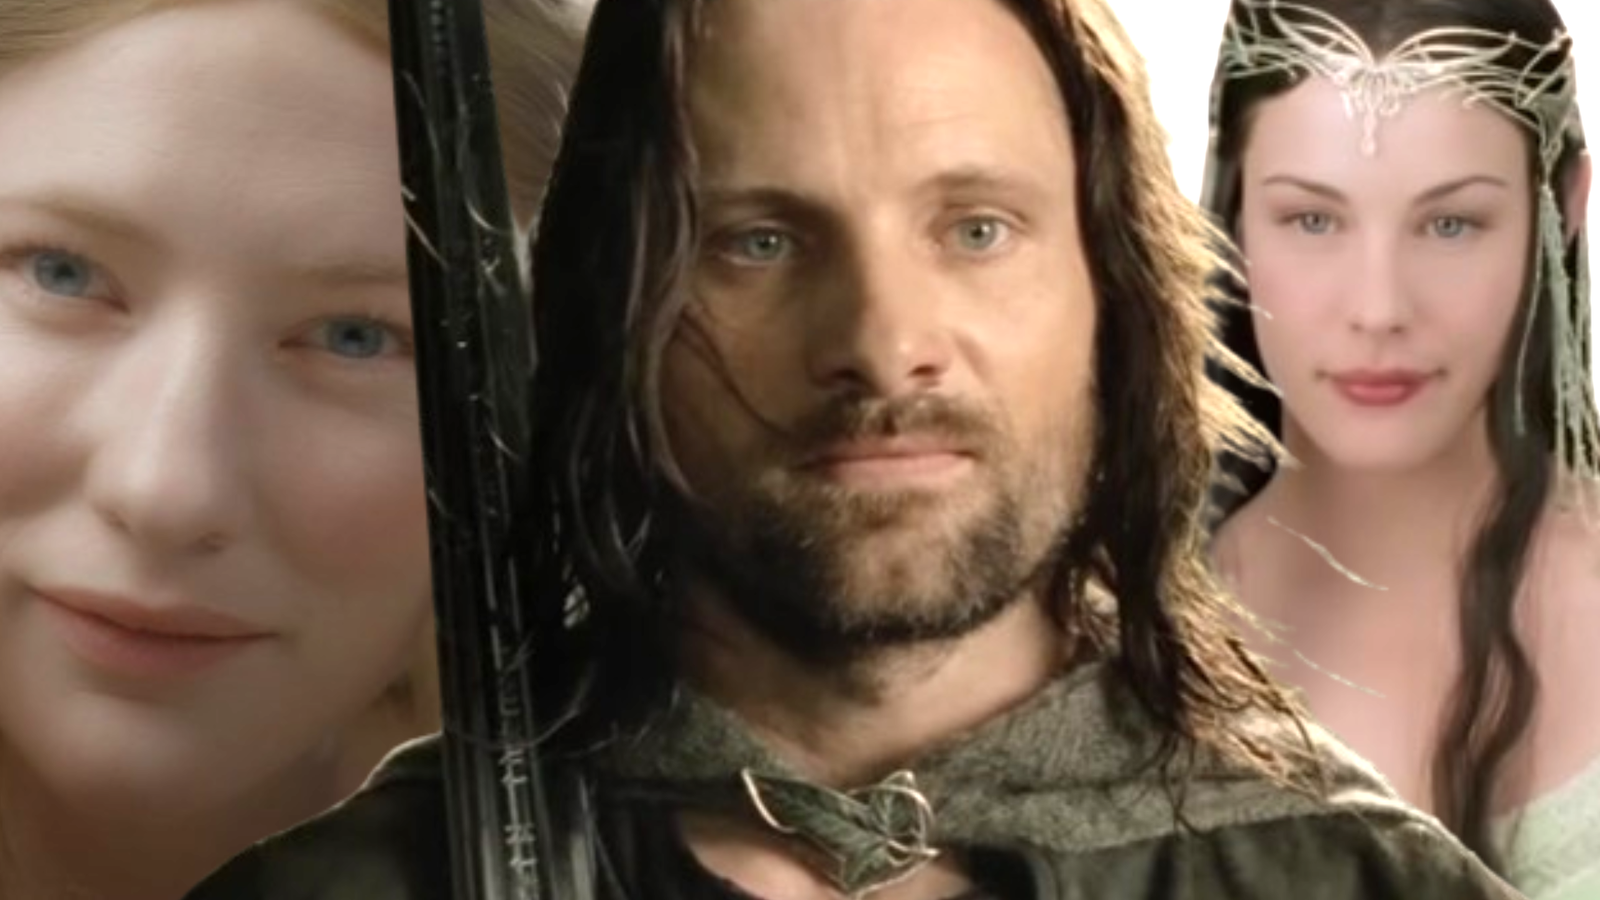 The Lord of the Rings trilogy characters Galadriel, Aragorn and Arwen